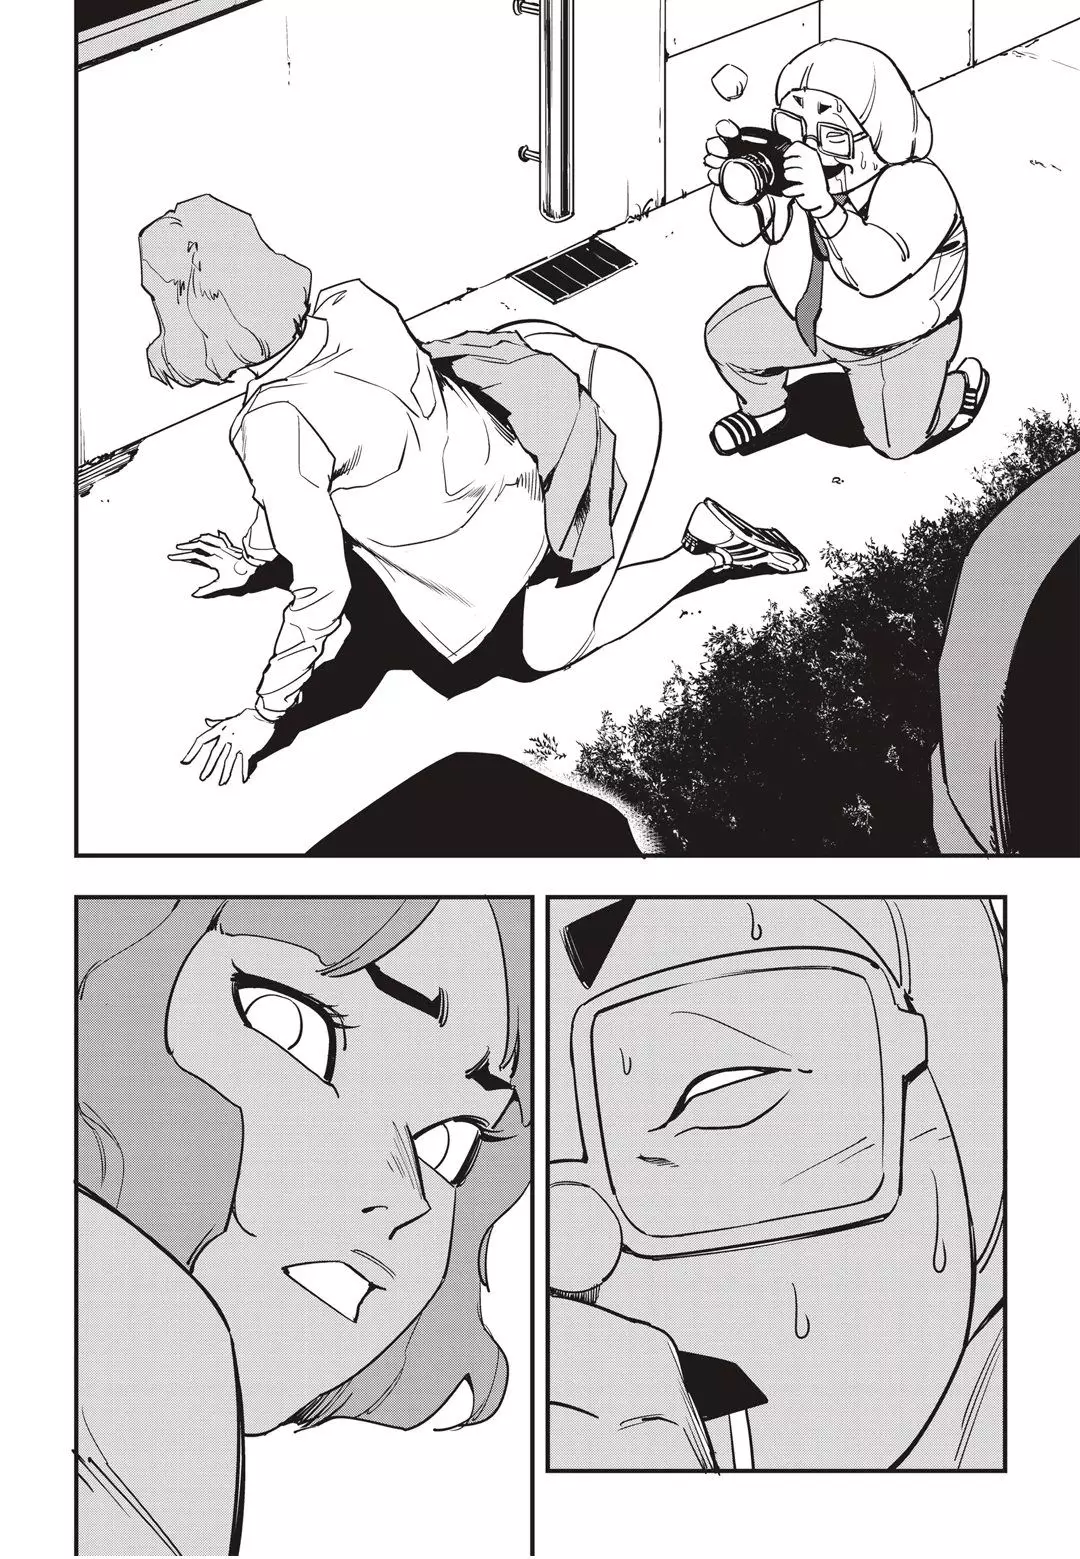 Fight Class 3 - 21 page 017